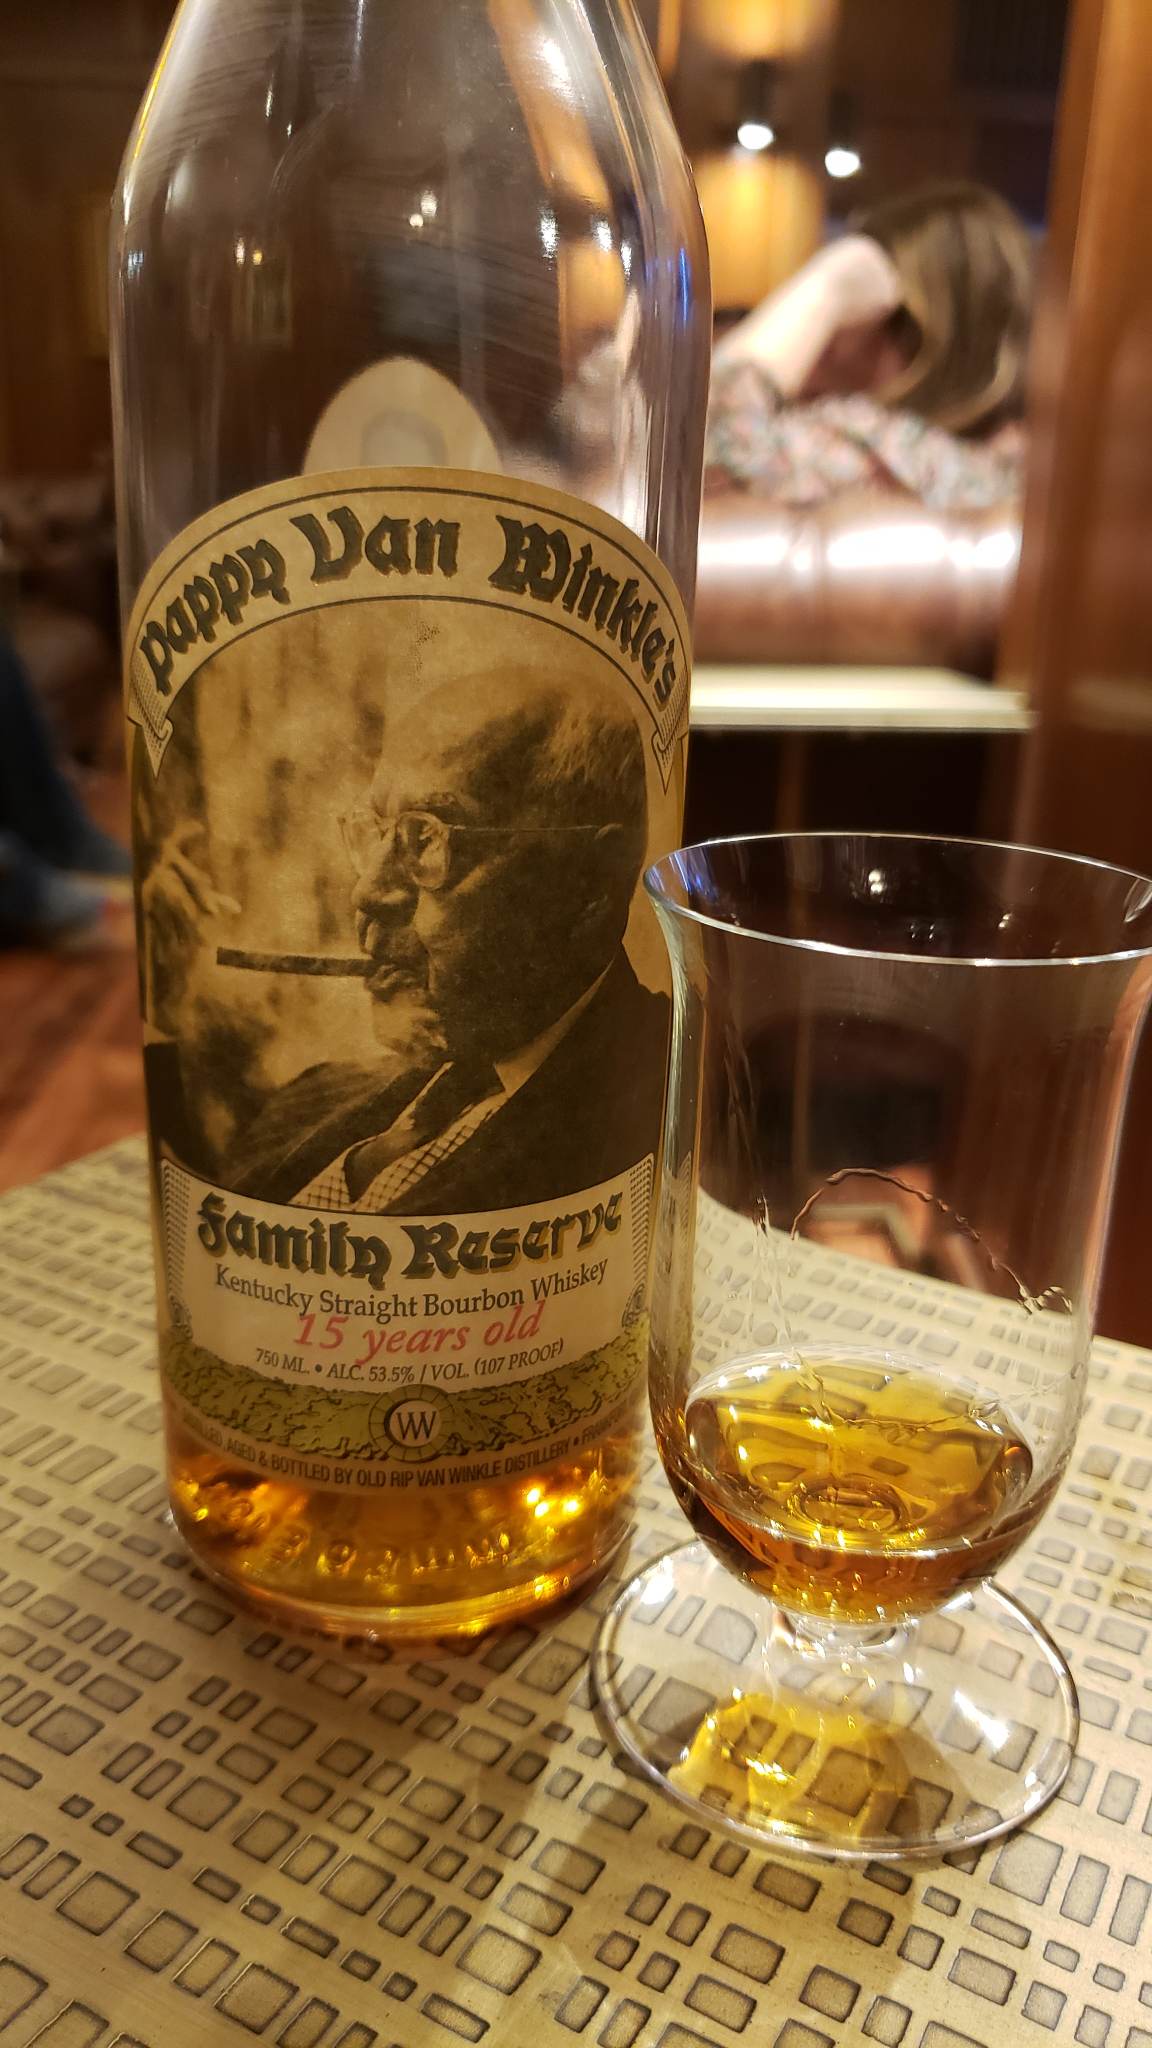 Marys Vine and The Study Cigar & Whiskey Review - Pappy Van Winkle - 15 Year Old Family Reserve